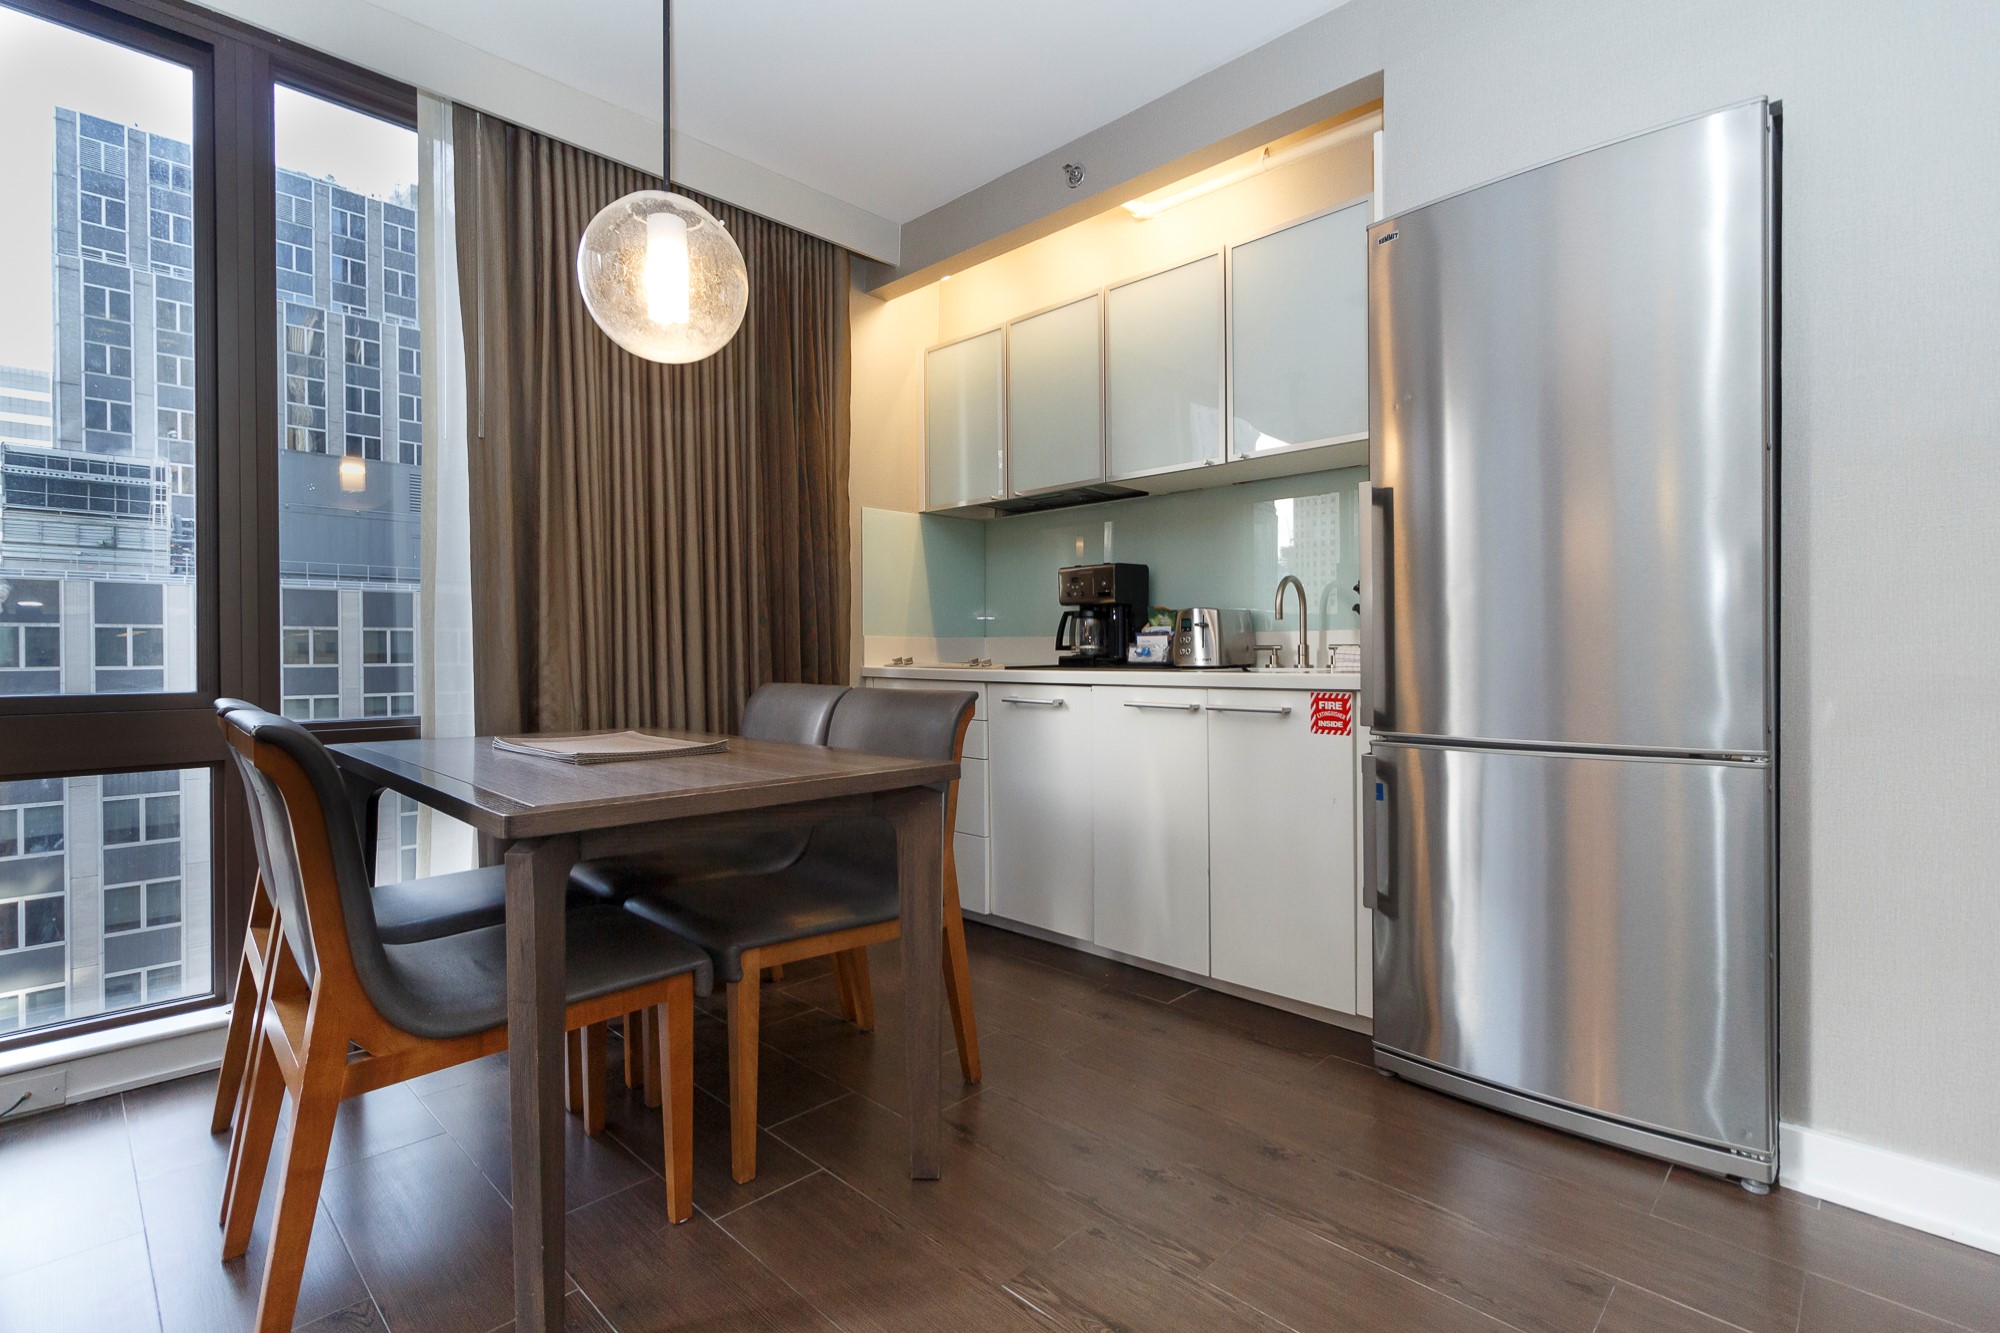 new york apartment photographer nyc ny Midtown East real estate interior two bedroom bathroom kitchen